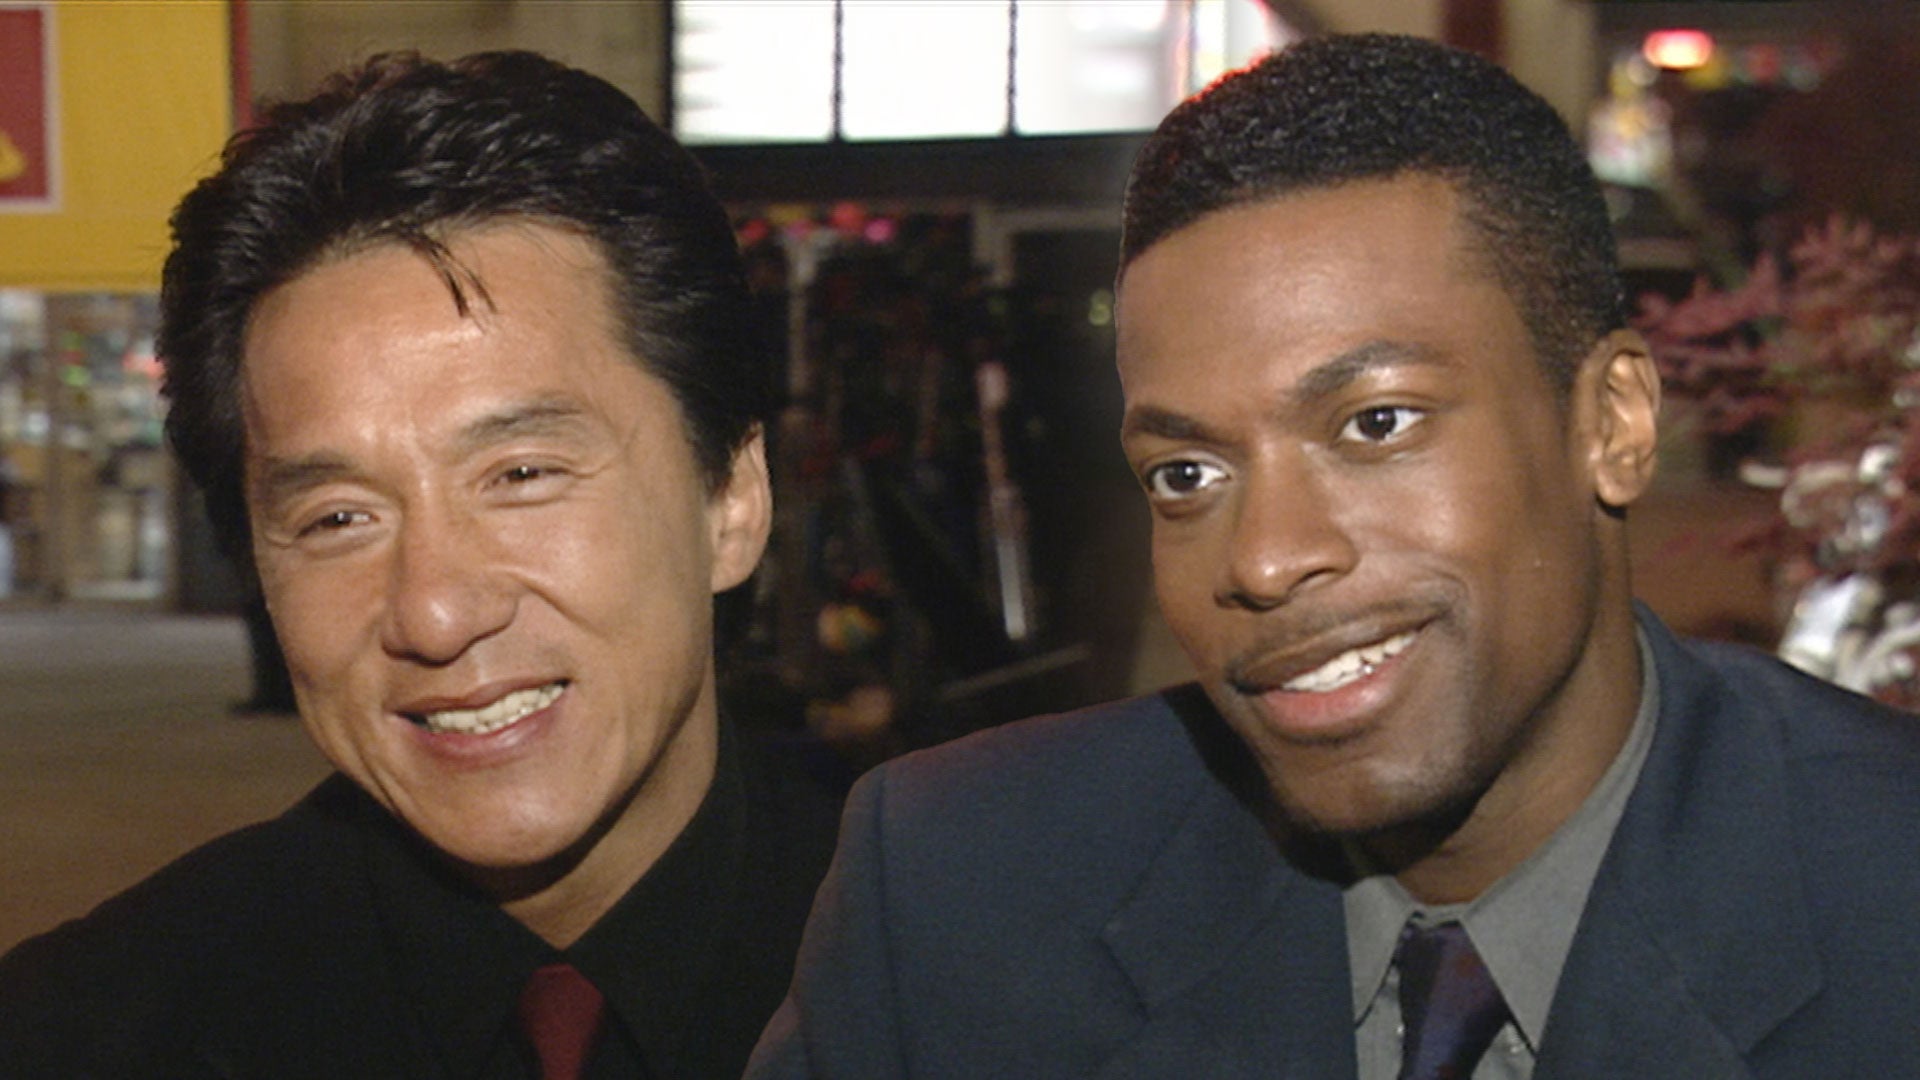 Rush Hour': Chris Tucker and Jackie Chan Tease Each Other During